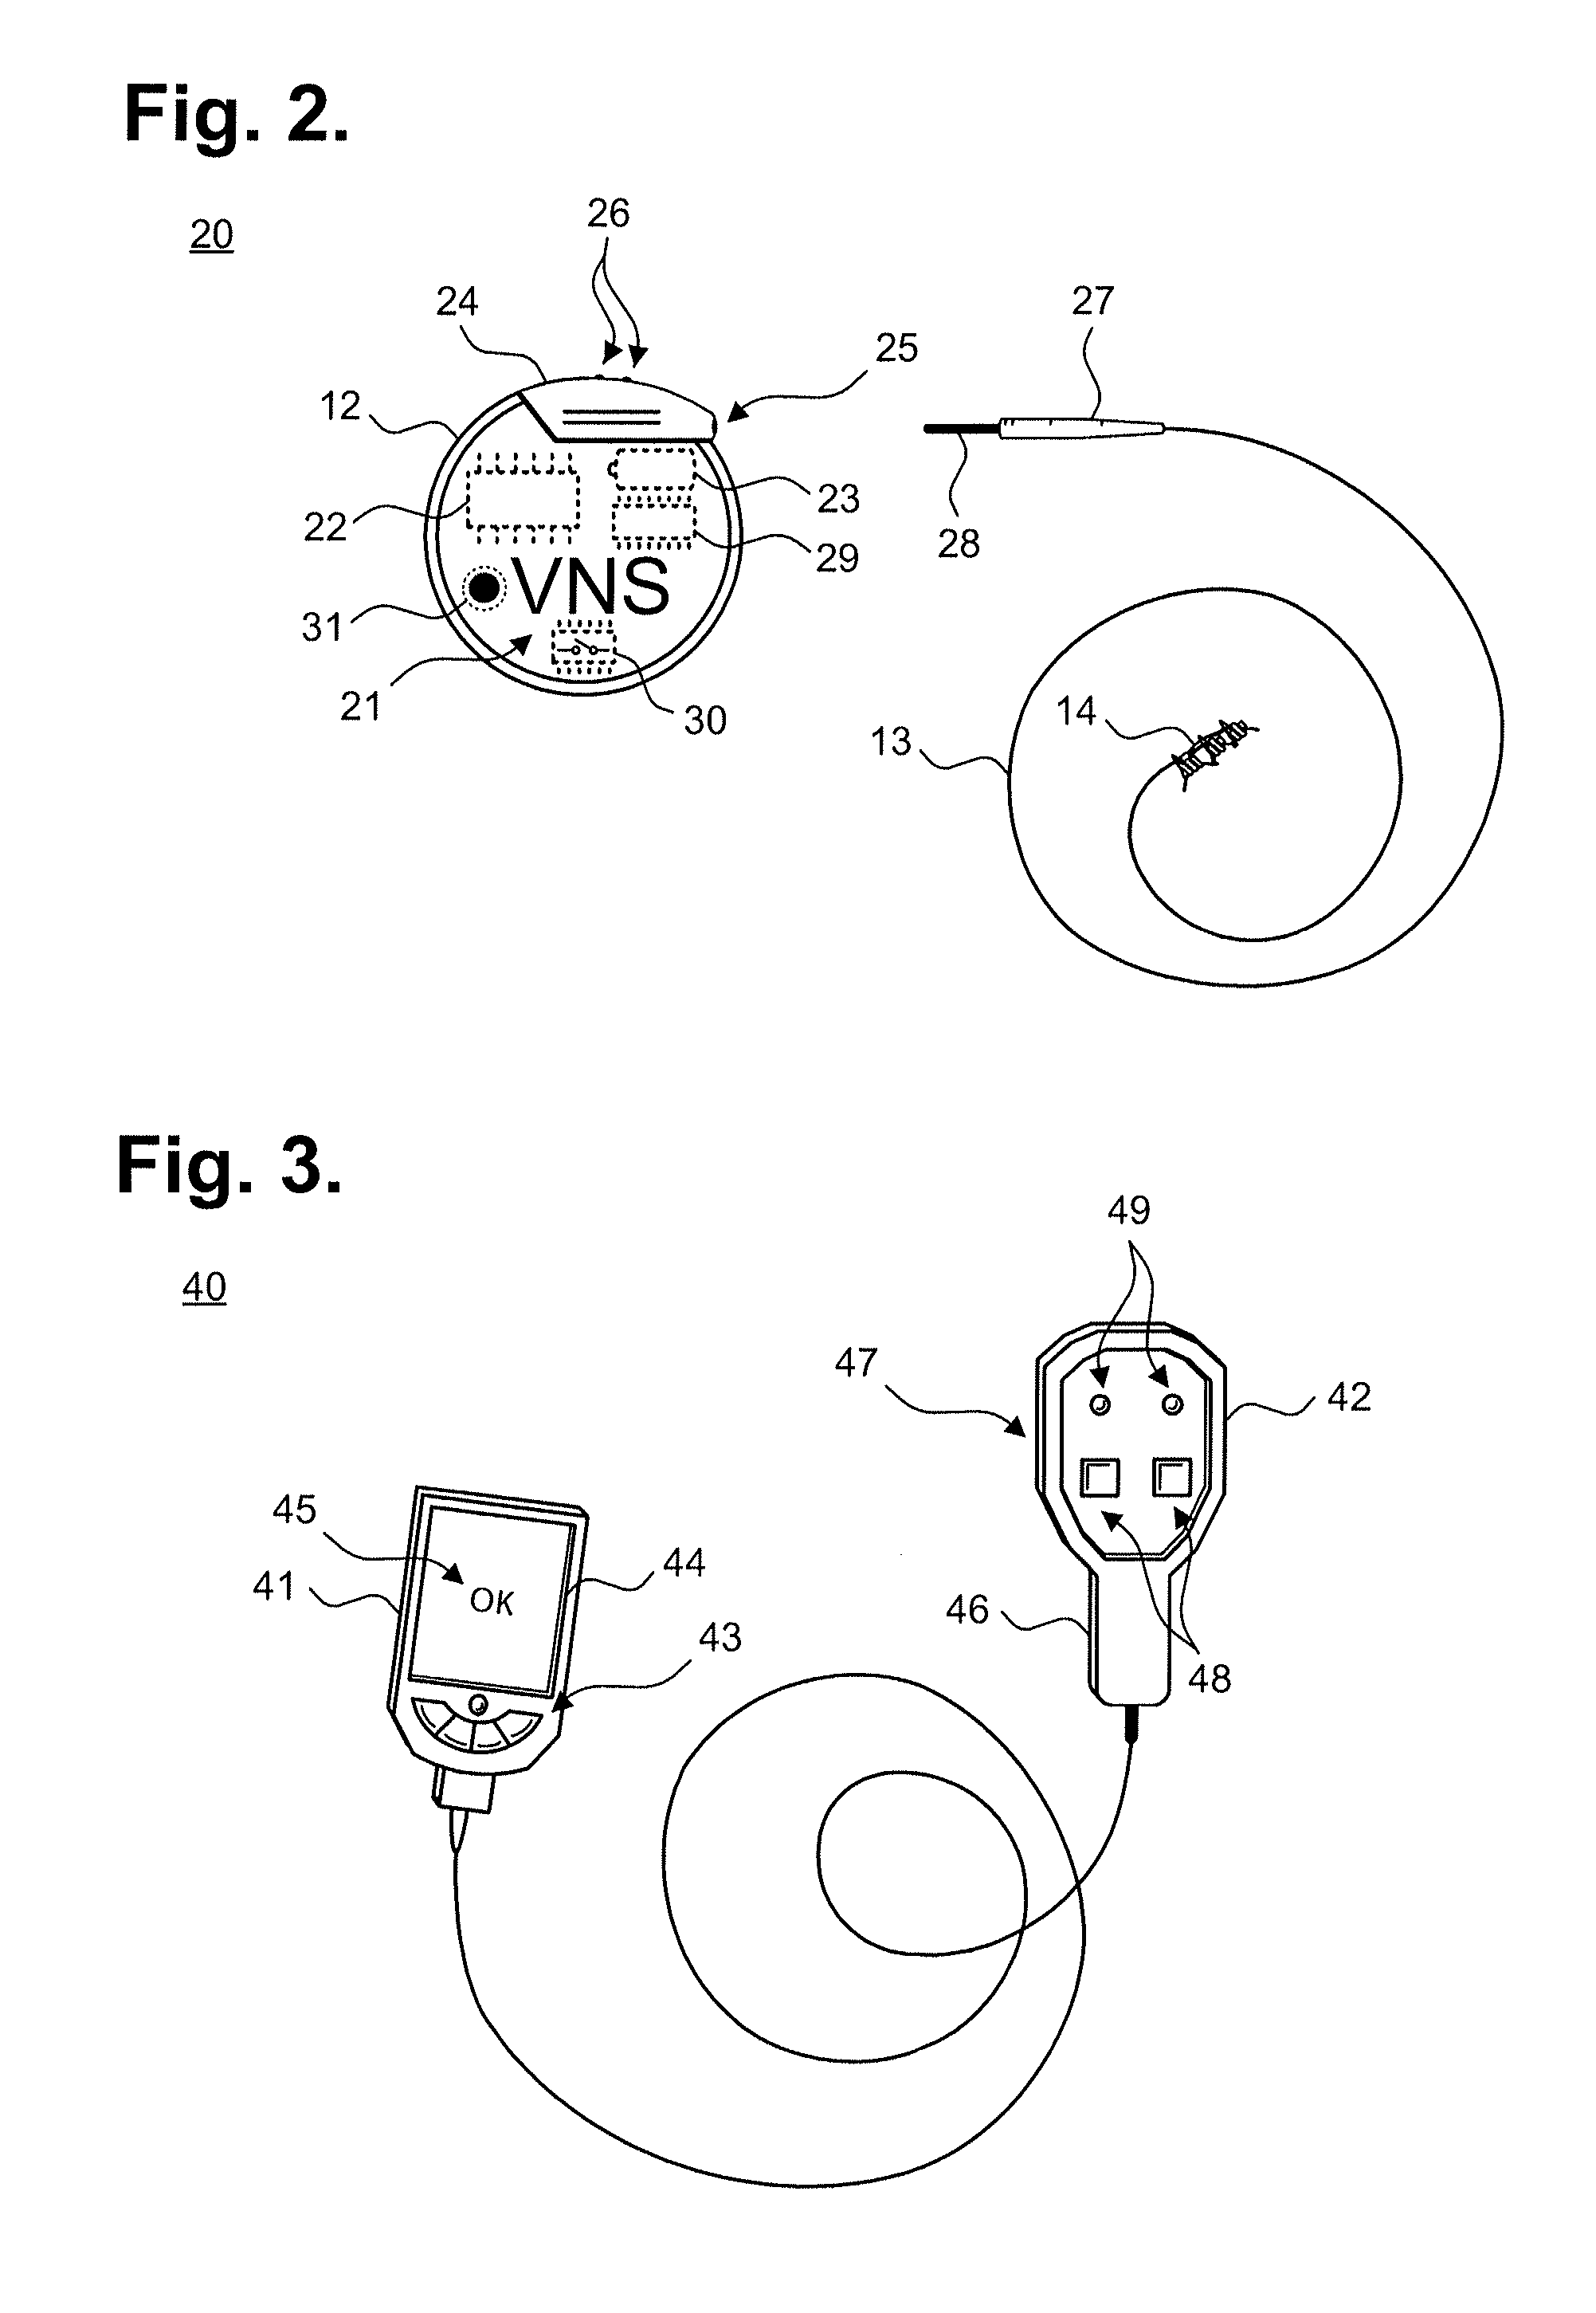 Implantable device for providing electrical stimulation of cervical vagus nerves for treatment of chronic cardiac dysfunction with leadless heart rate monitoring